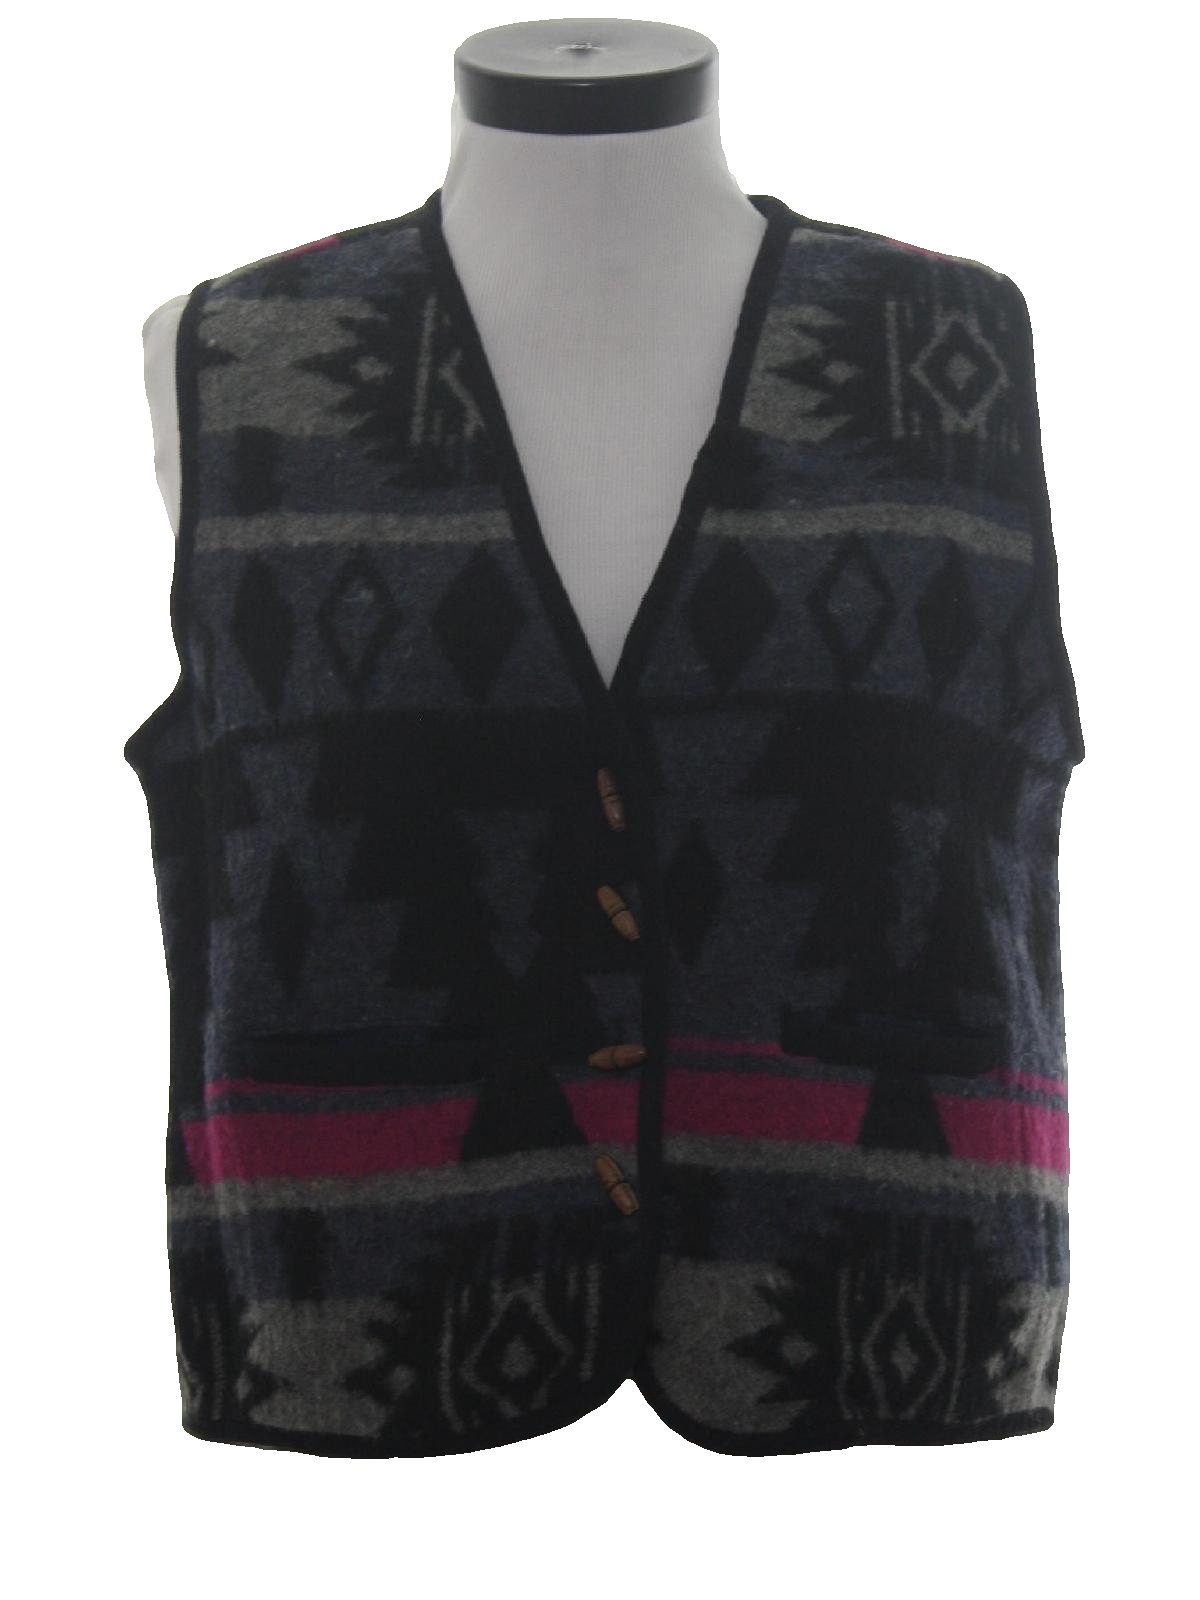 Vintage At Last Eighties Vest: Late 80s or Early 90s -At Last- Womens ...